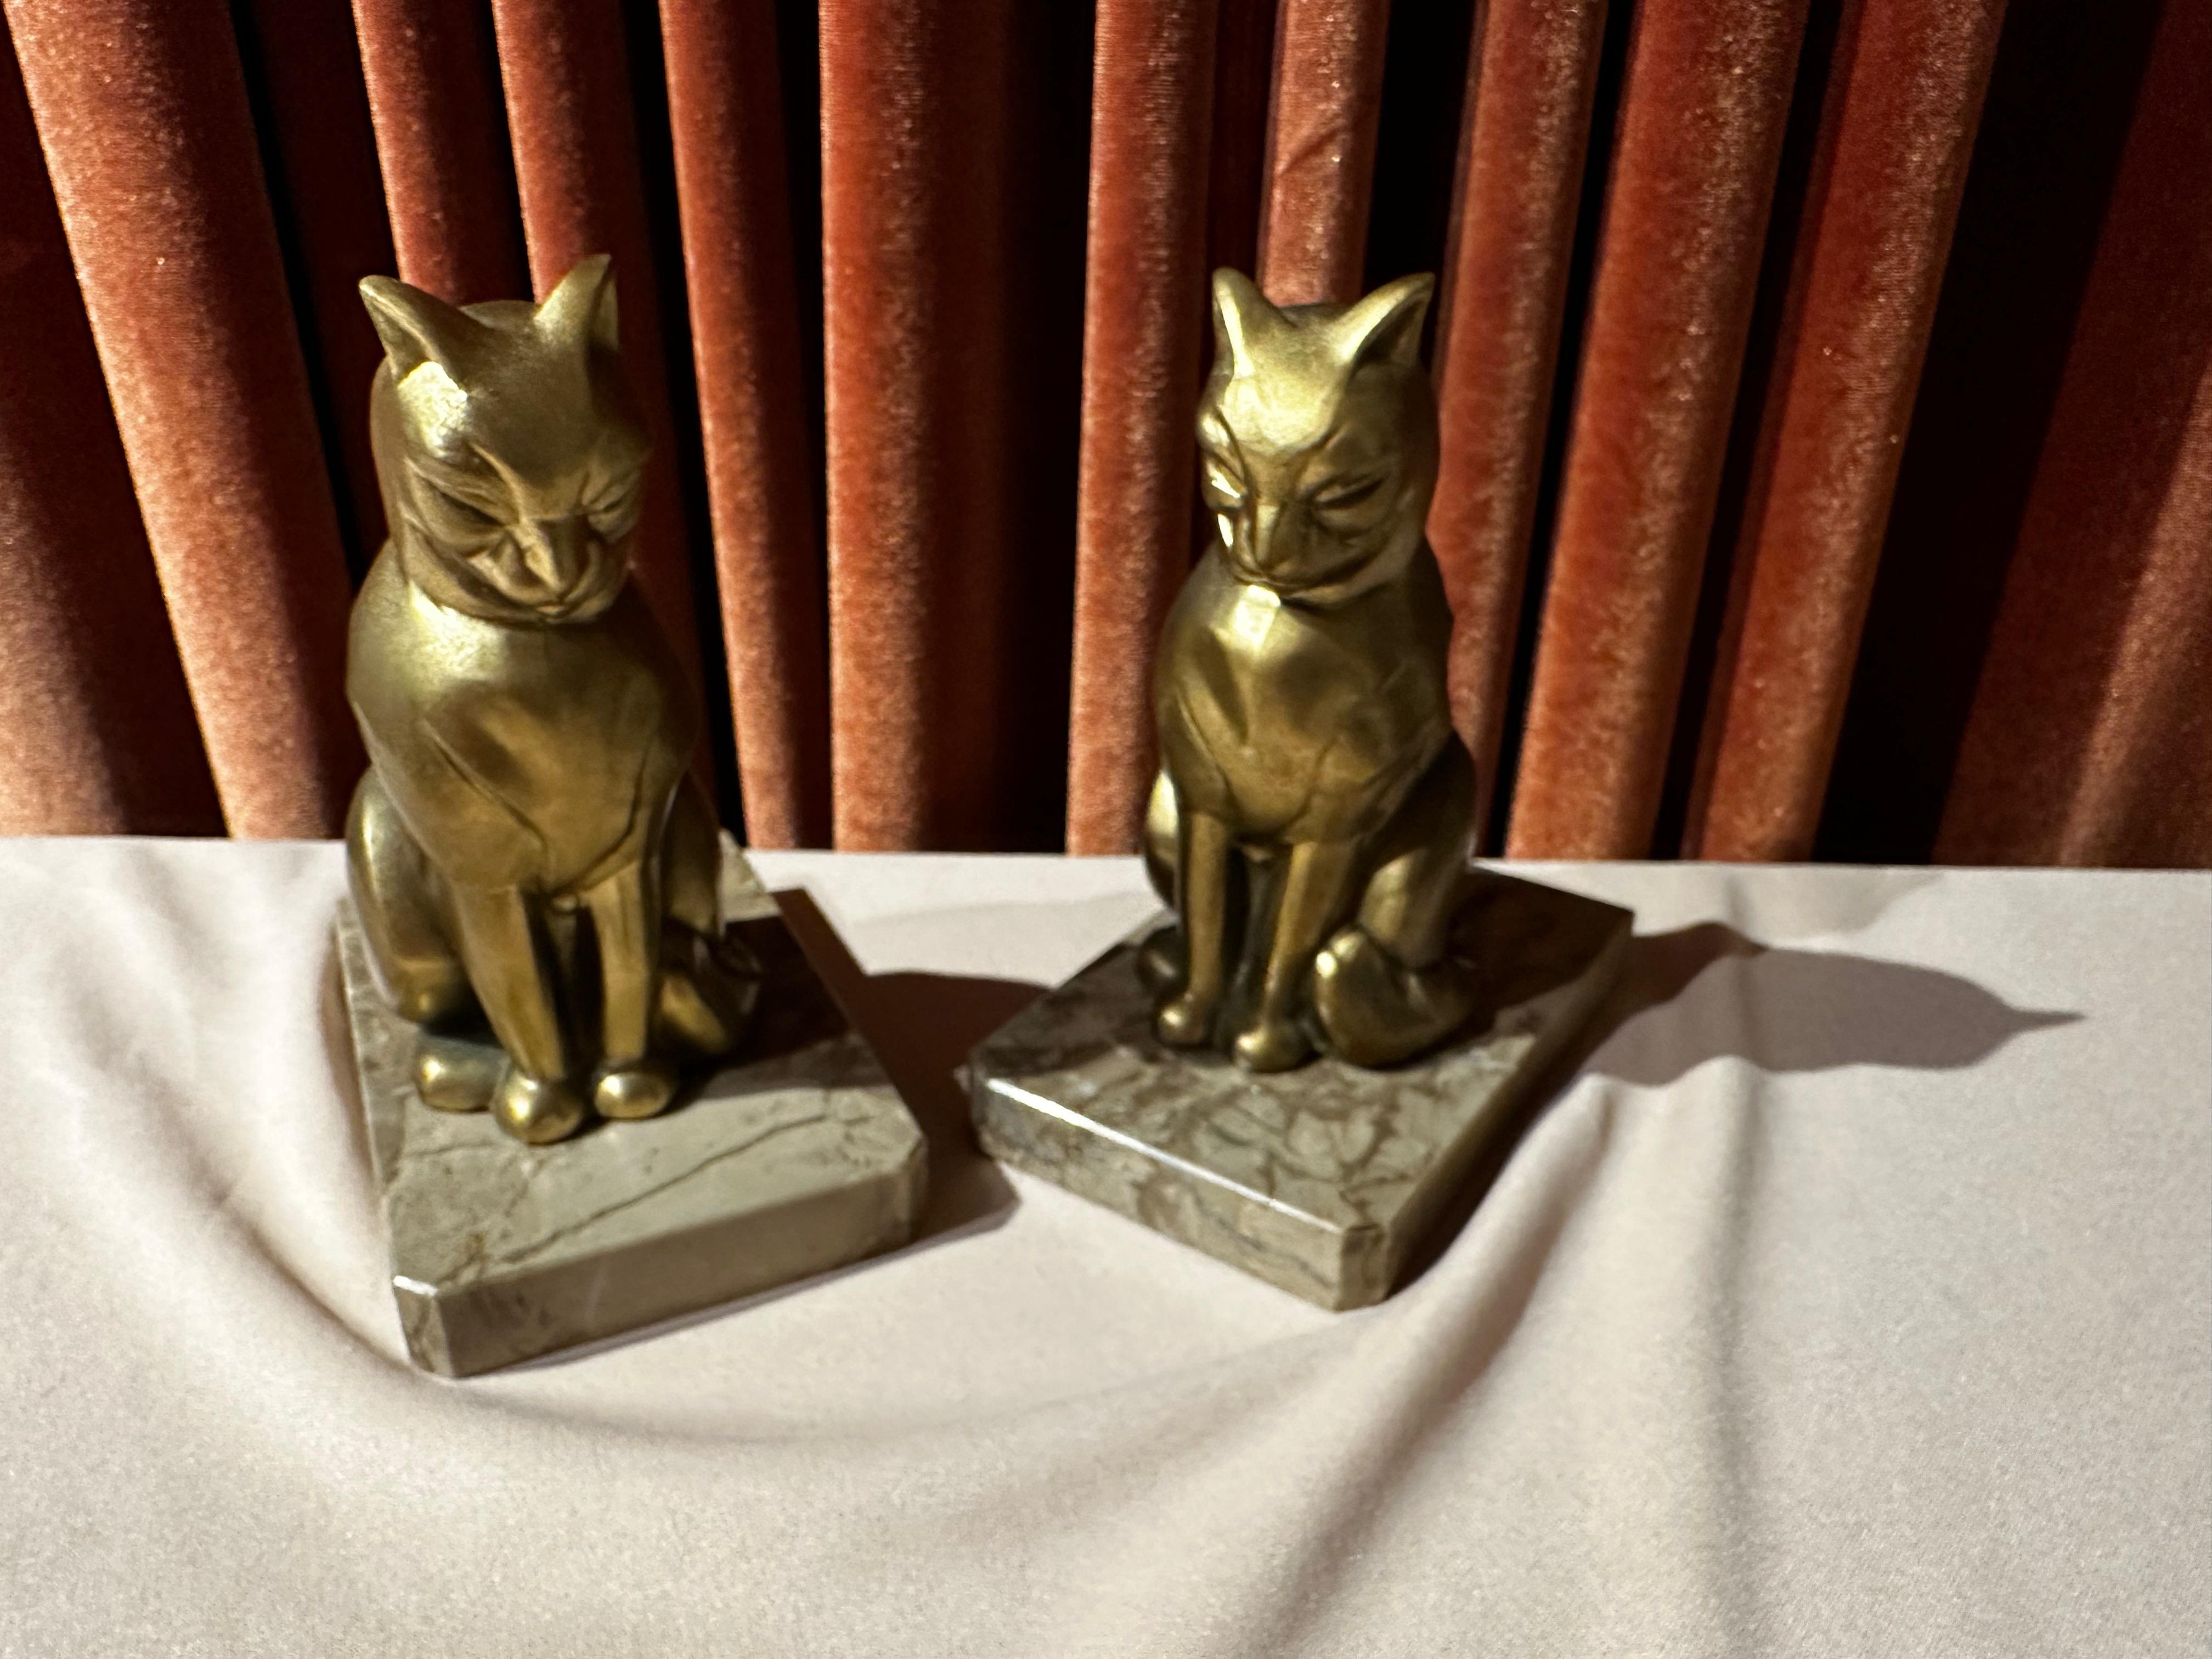 Art Deco cubist-style cat bookends by Franjou. These cat bookends are both signed Franjou, made in France, and dated between 1920-1949. These modern-style cats are made of gold patinated metal and have large expressive faces in a classic sitting